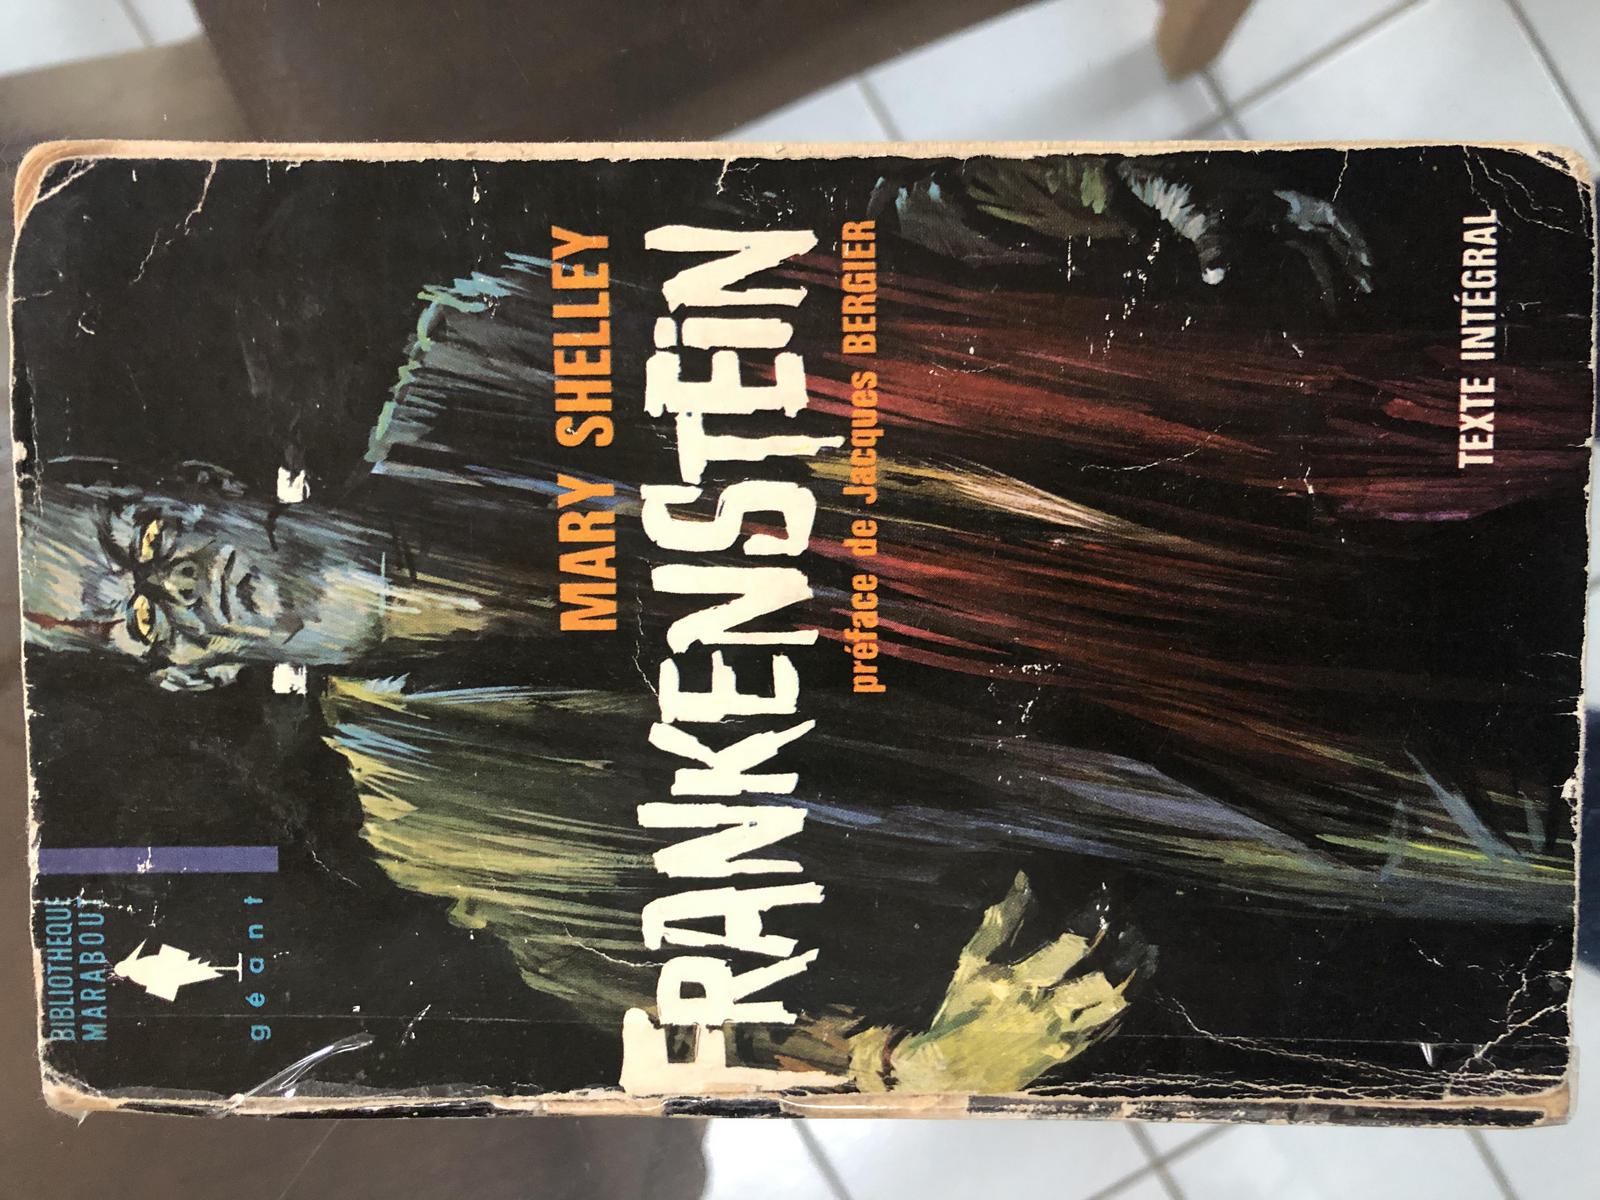 Mary Shelley: Frankenstein (French language, 1964, Marabout)